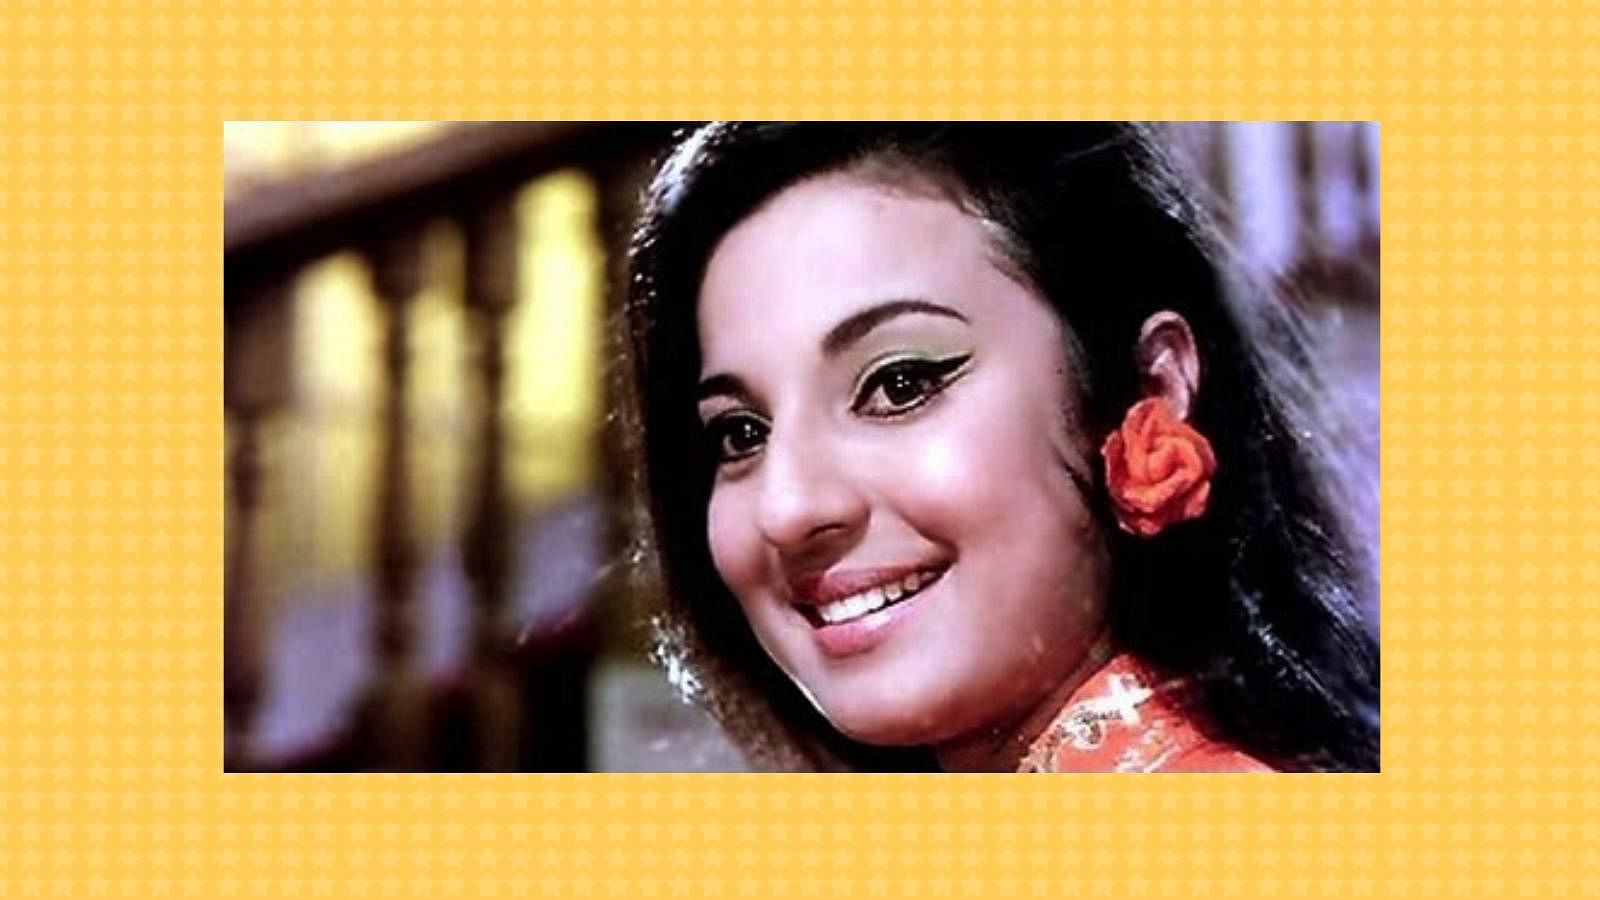 Tanuja’s exuberance lit up the big screen through the 60s and 70s.